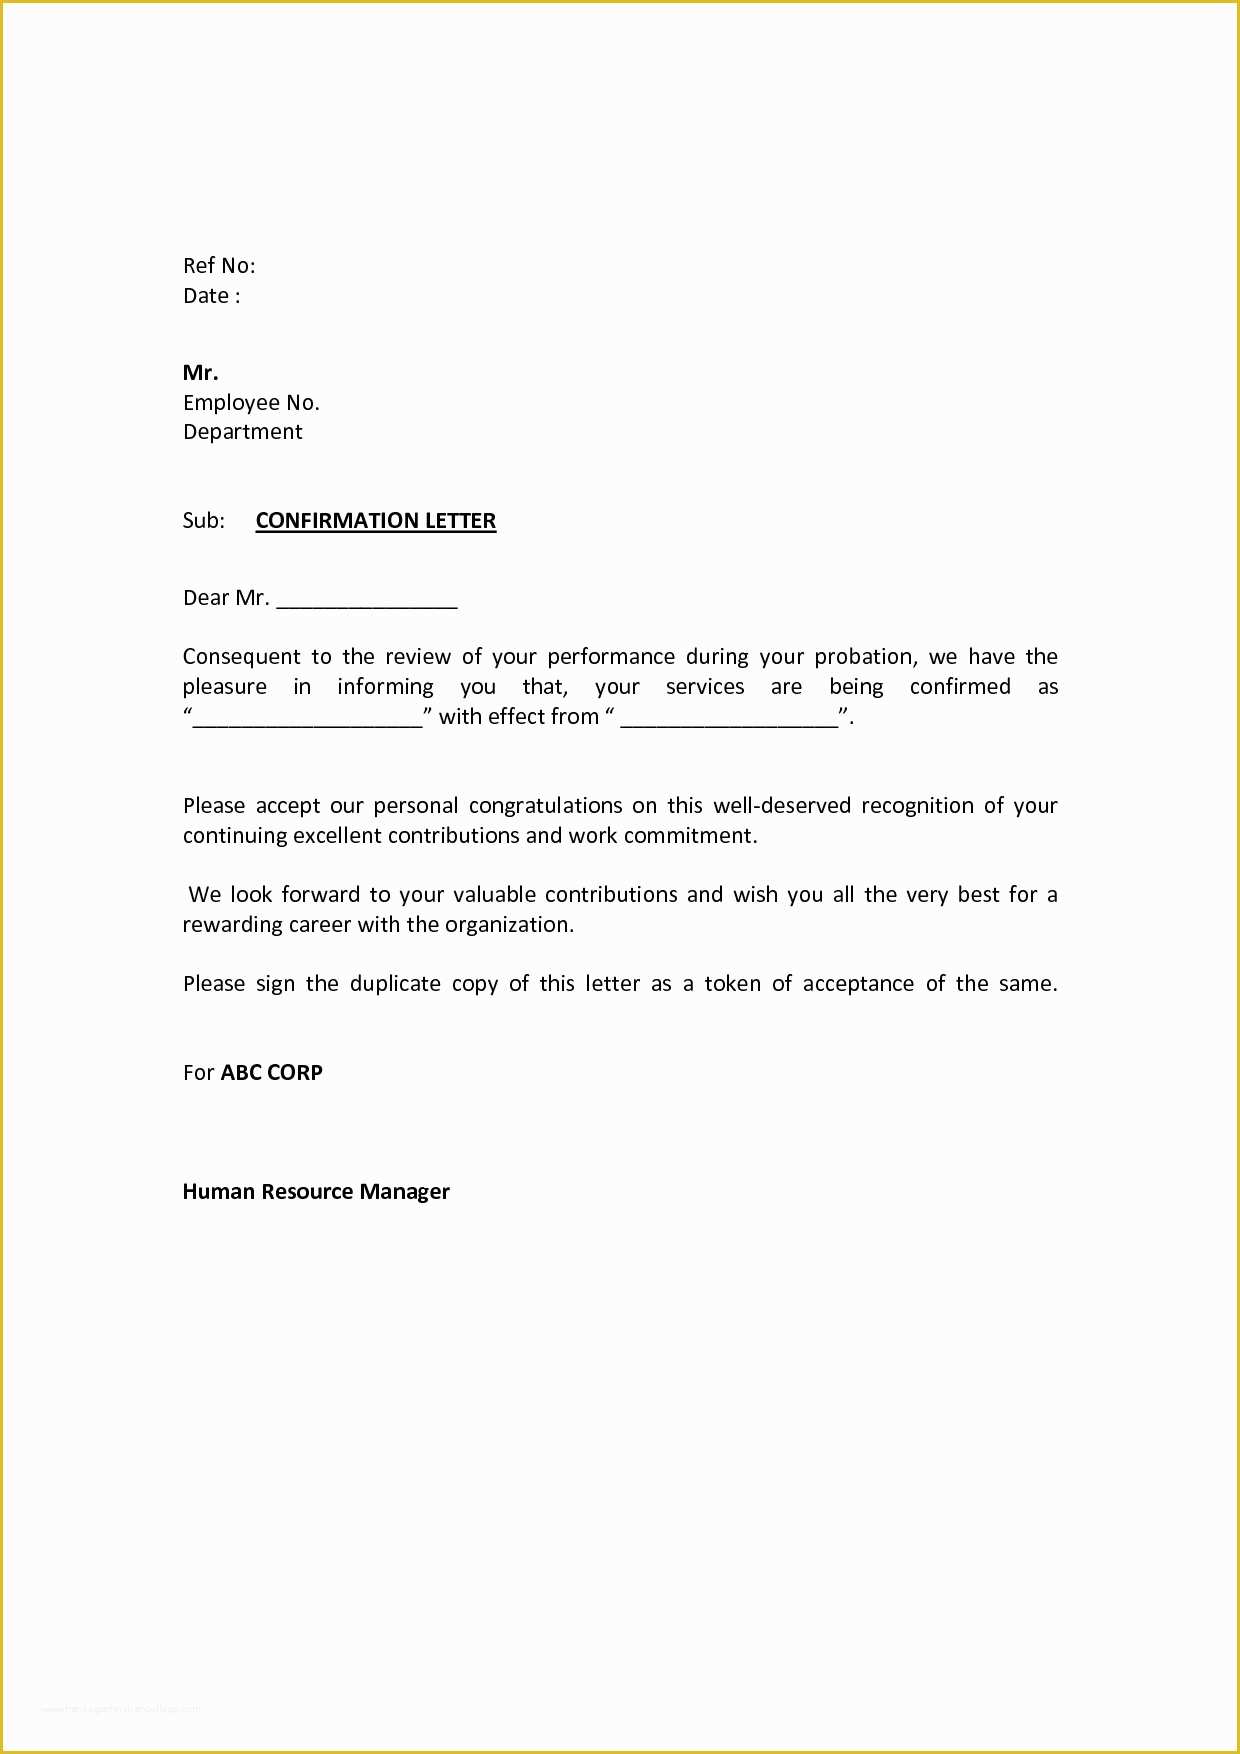 Letter Confirming Employment Free Template Of Employee Probation Confirmation Letter Template